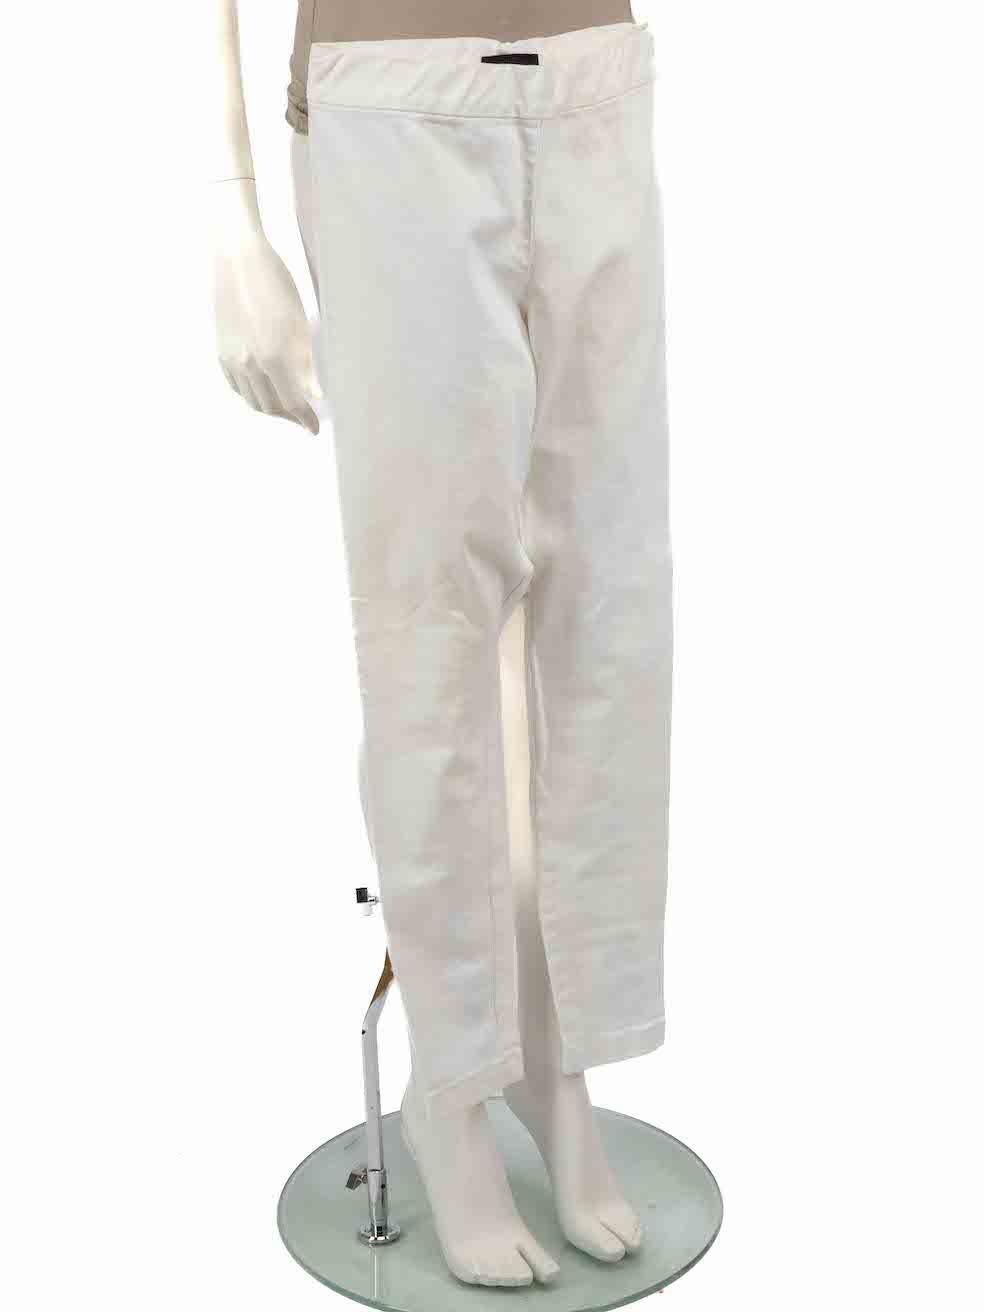 CONDITION is Very good. Minimal wear to trousers is evident. Minimal wear to the right leg with a small mark to the front on this used The Row designer resale item.
 
 
 
 Details
 
 
 White
 
 Cotton
 
 Skinny trousers
 
 Low rise
 
 Zipped cuffs
